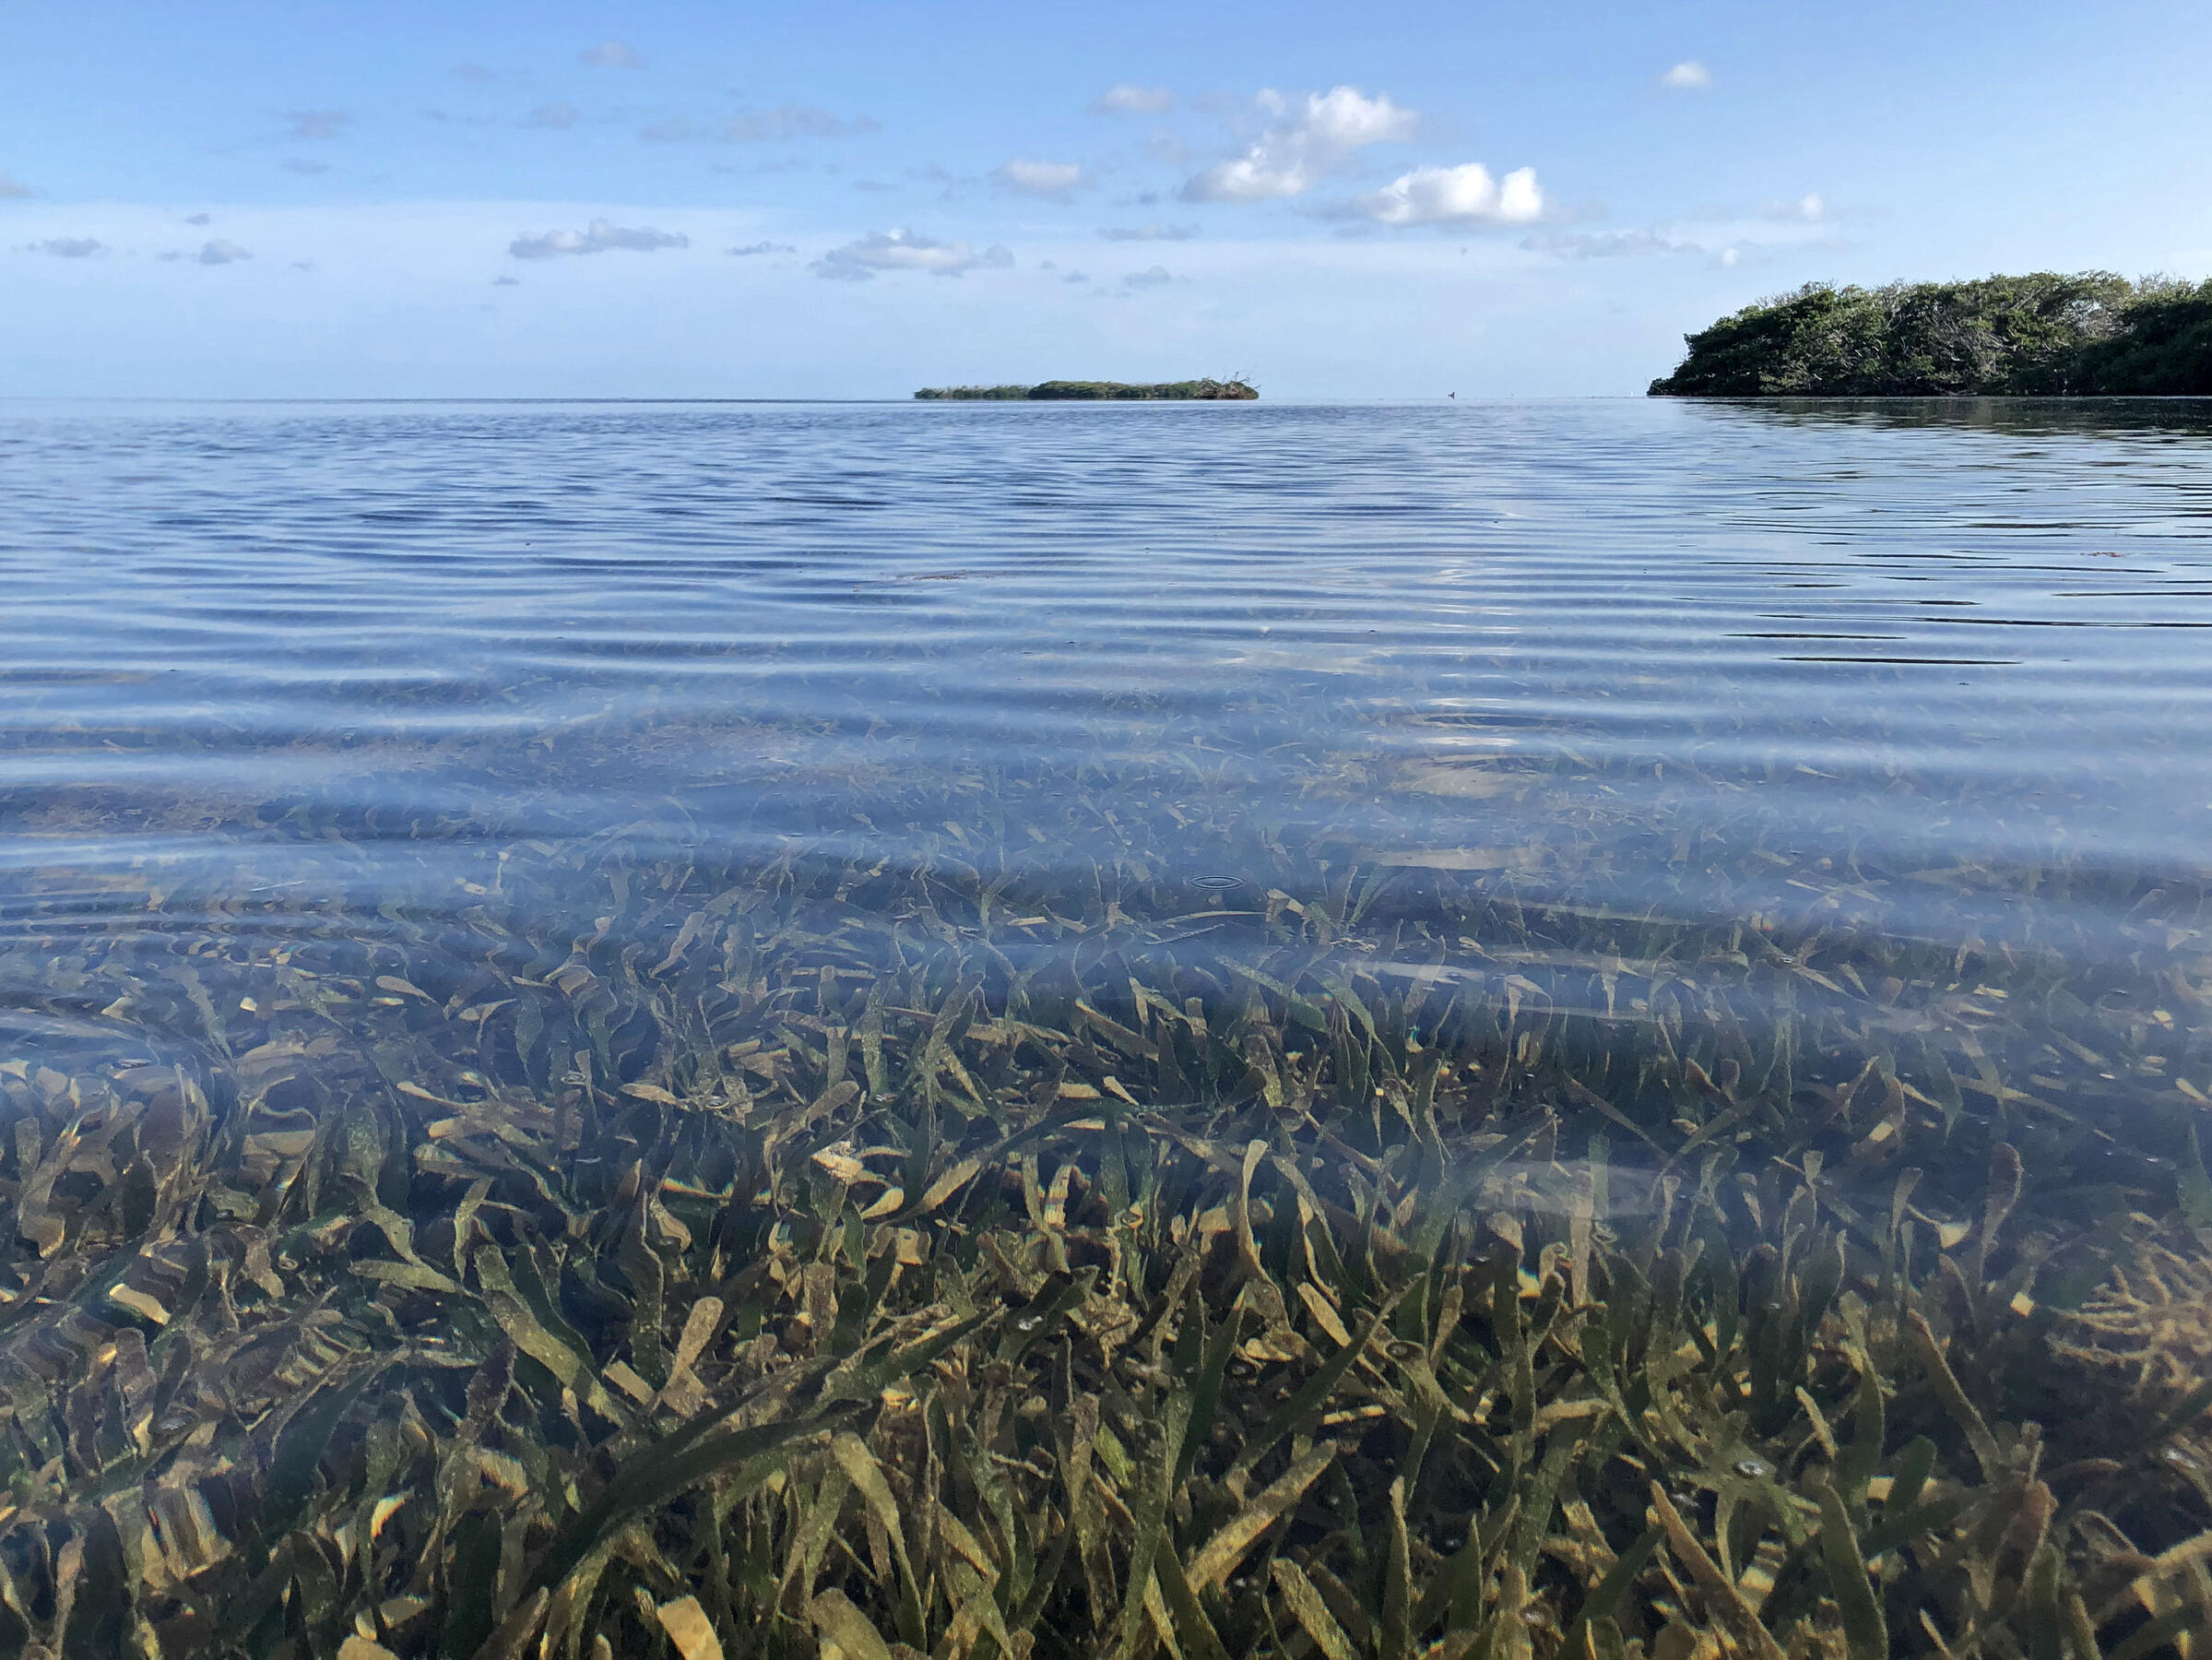 Seagrass waving under calm water and calm sky, with mangrove islands in the background.